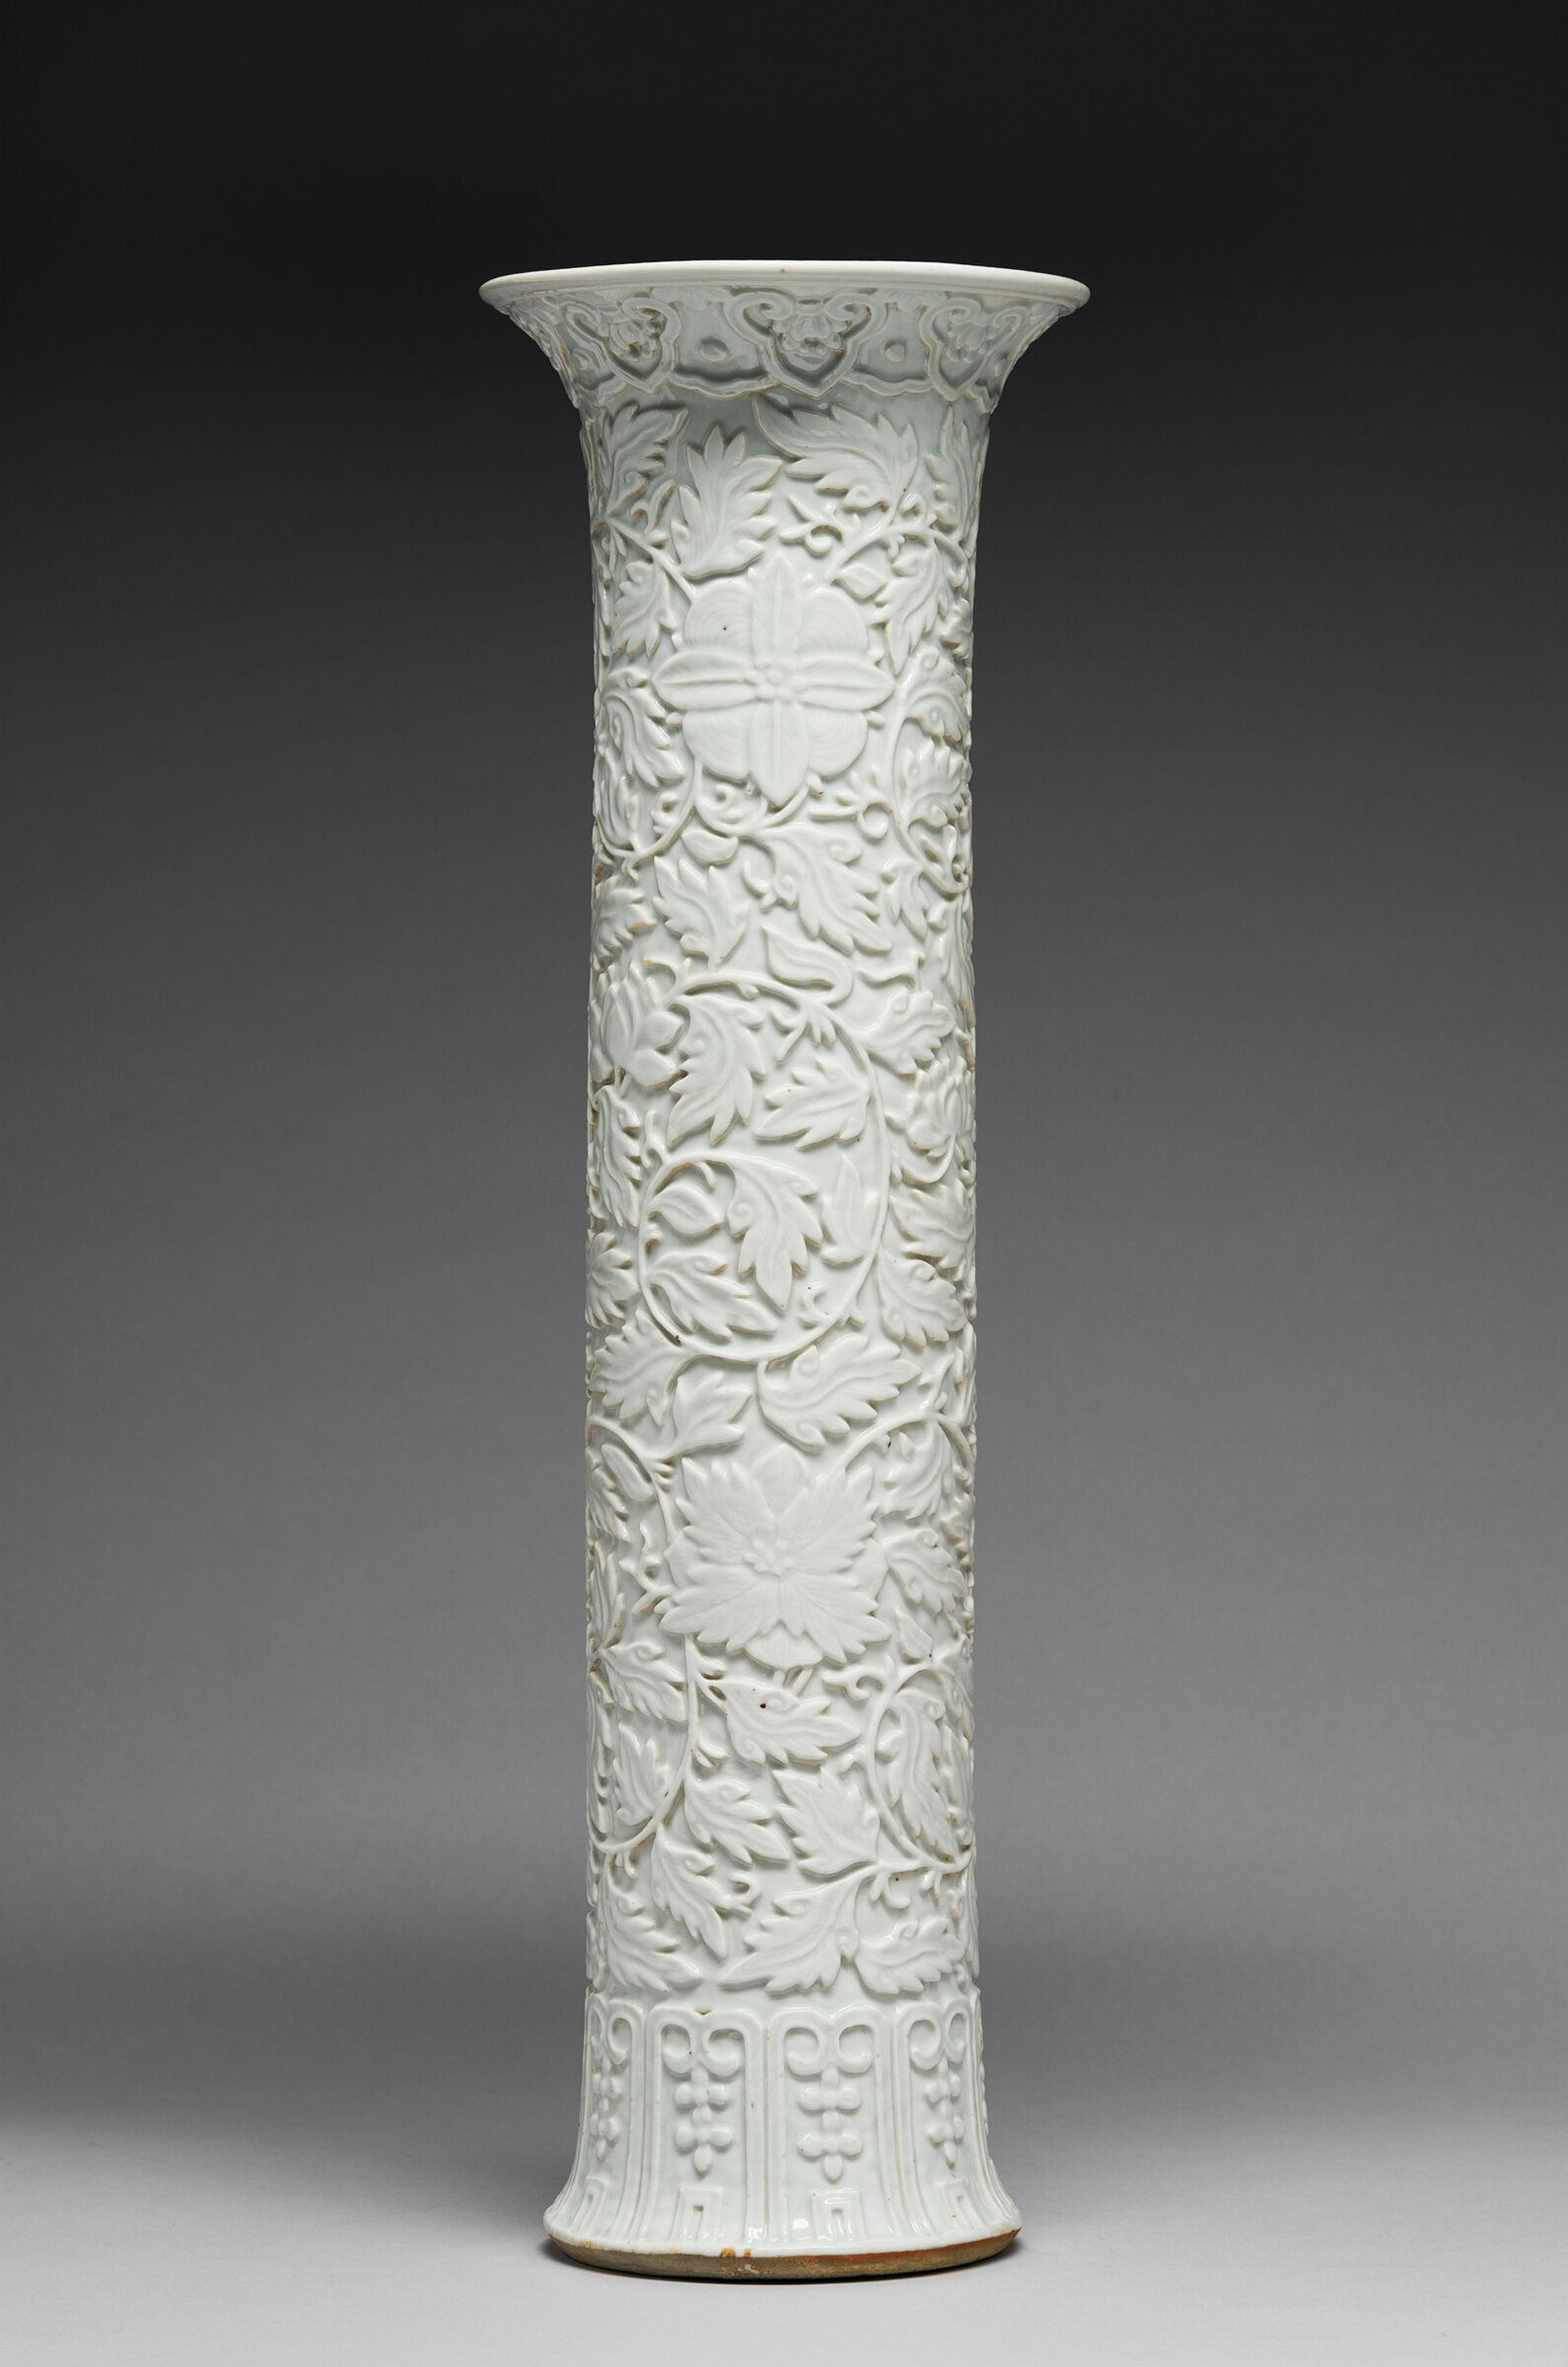 One Vase From A Garniture Set: Tall Cylindrical Vase With Flaring Lip And Subtly Flaring Foot And With Decoration Of A Scrolling Vine With Fruiting And Flowering Branches